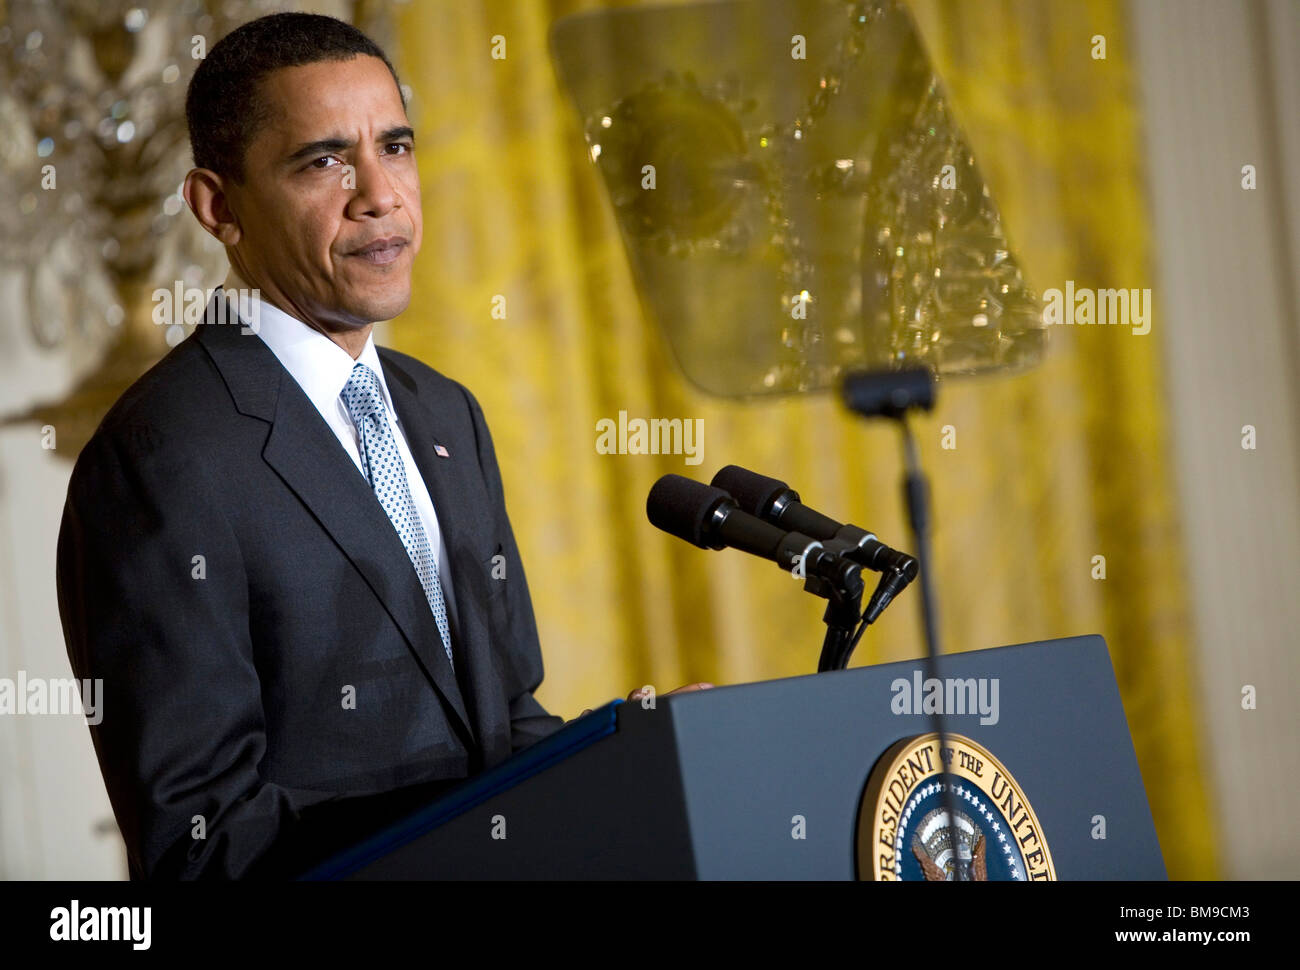 13 February 2009 – Washington, D.C. – President Barack Obama delivers remarks about the economic stimulus package to members of the Business Council in the East Room of the White House. Stock Photo